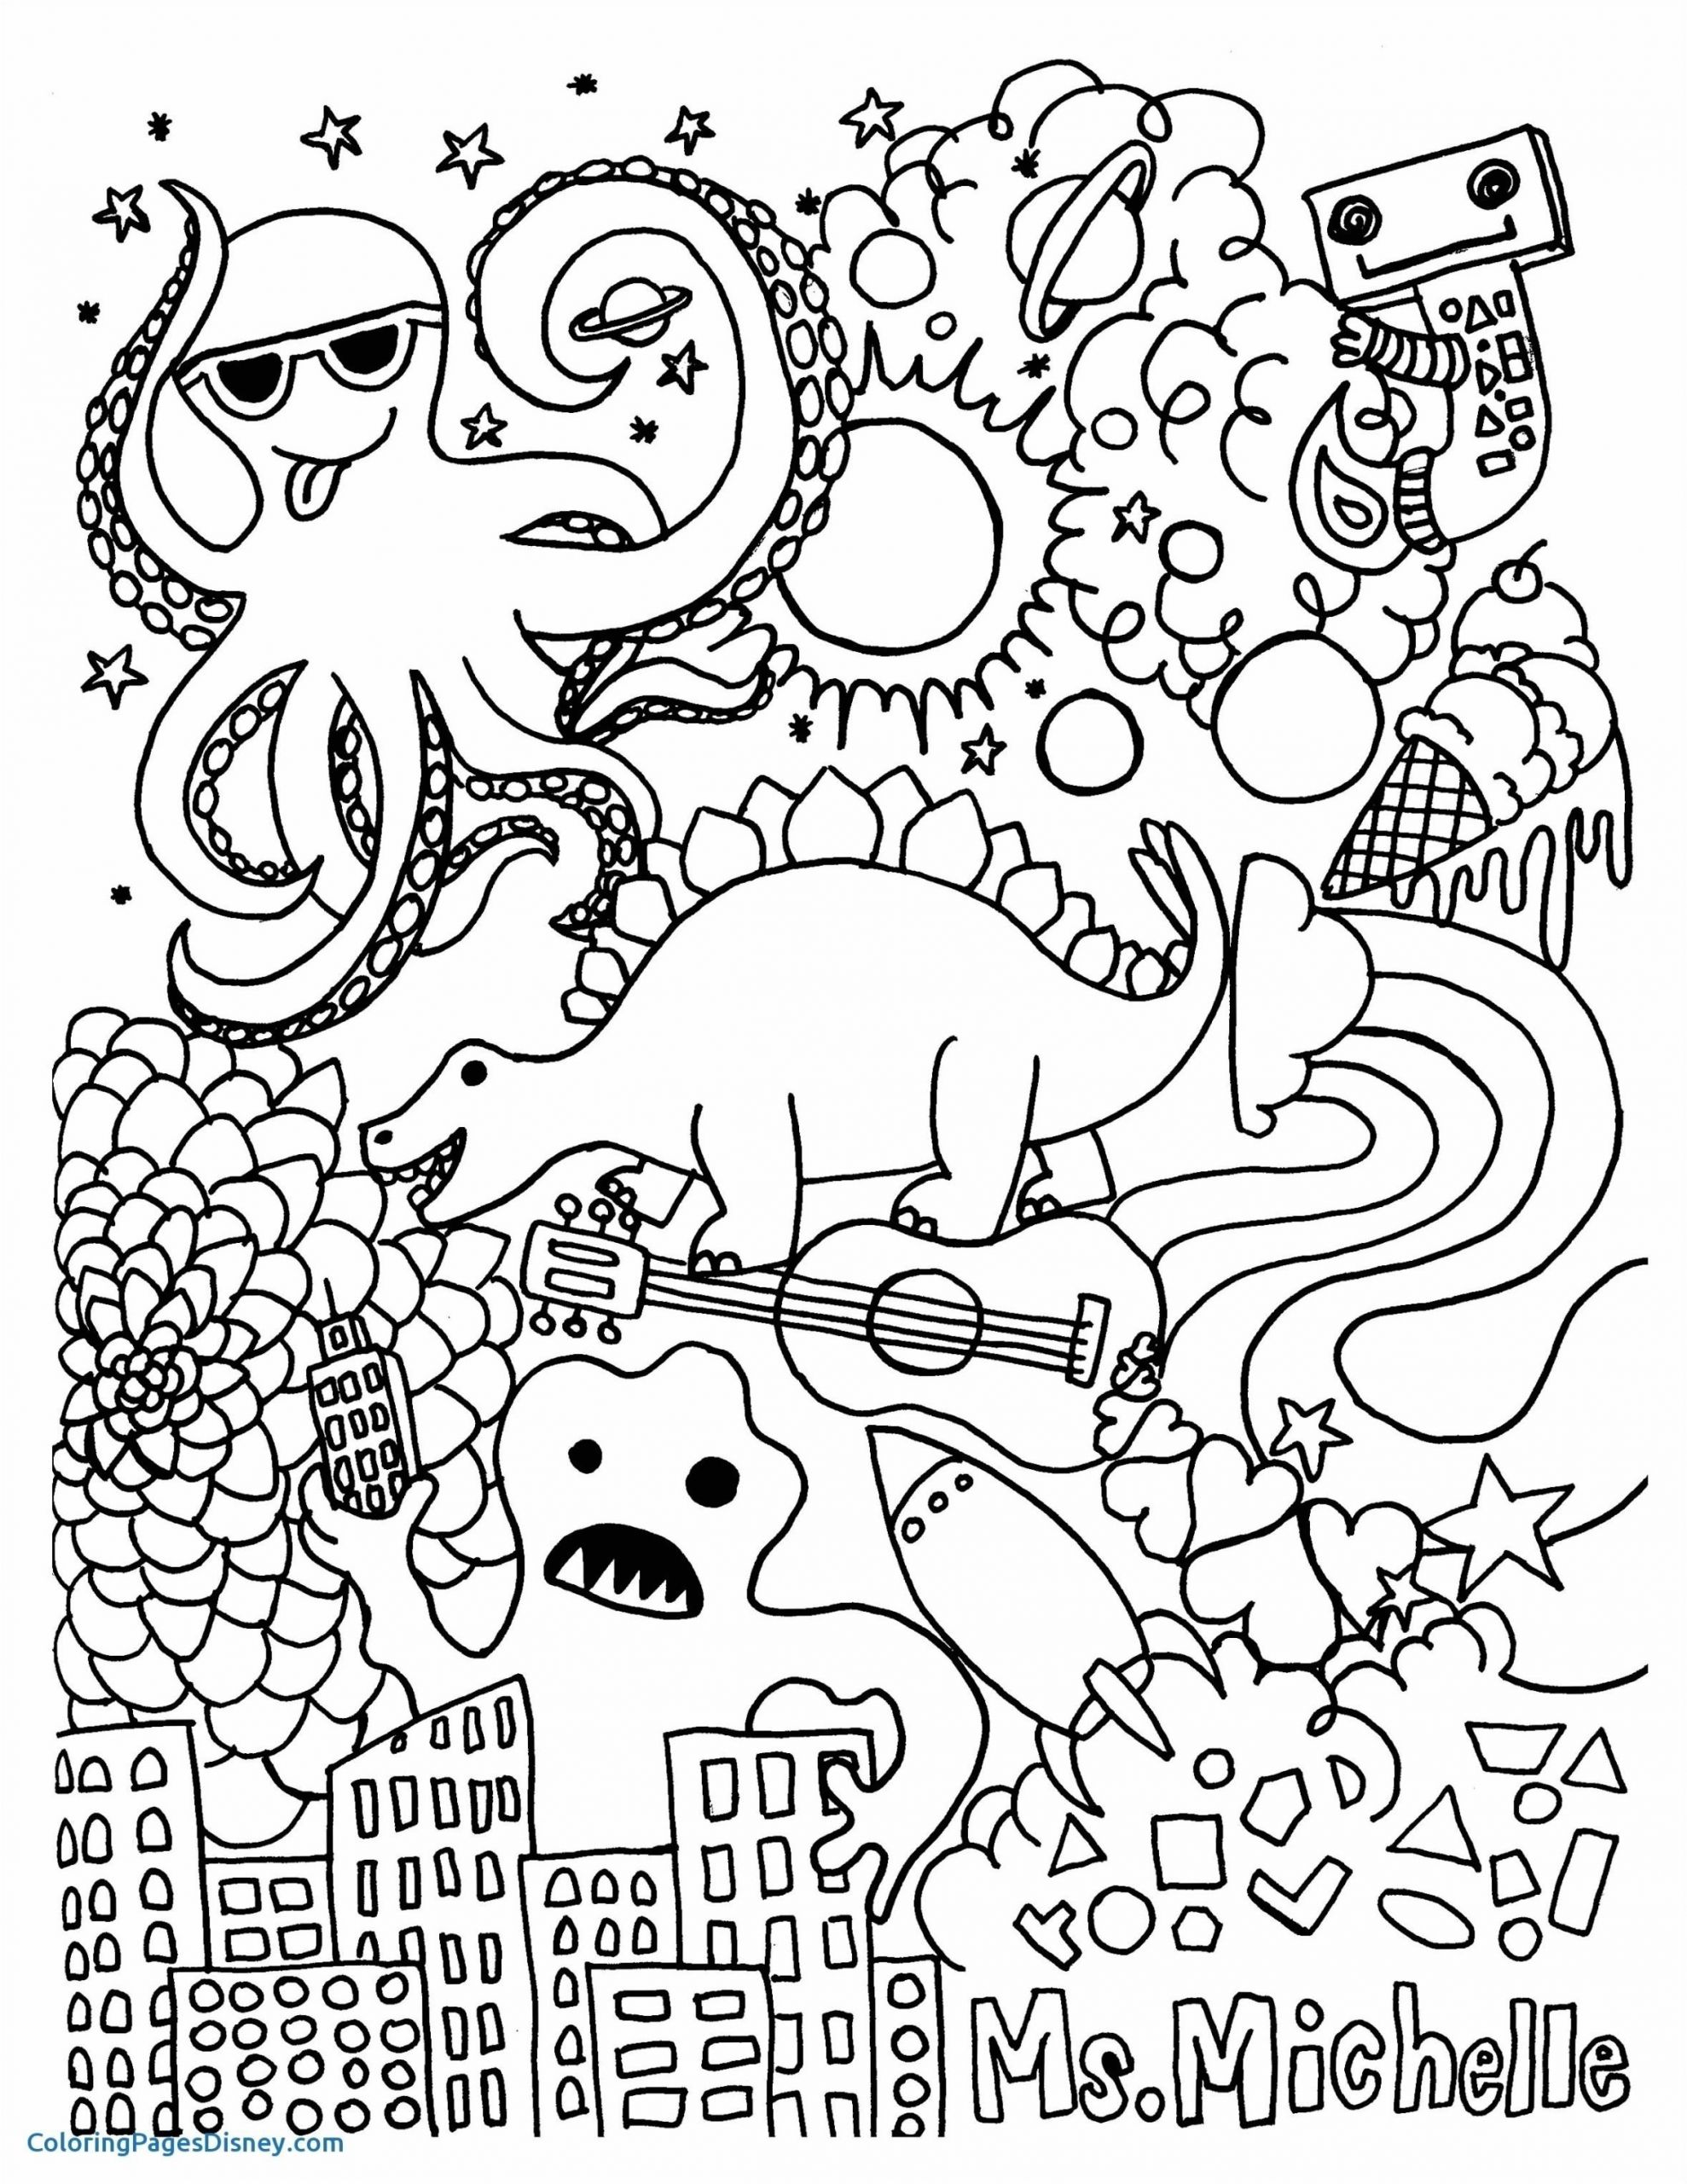 coloriage simple imprimer filename coloring page luxe awesome cheval coloriage en ligne filename coloring page of coloriage simple imprimer filename coloring page